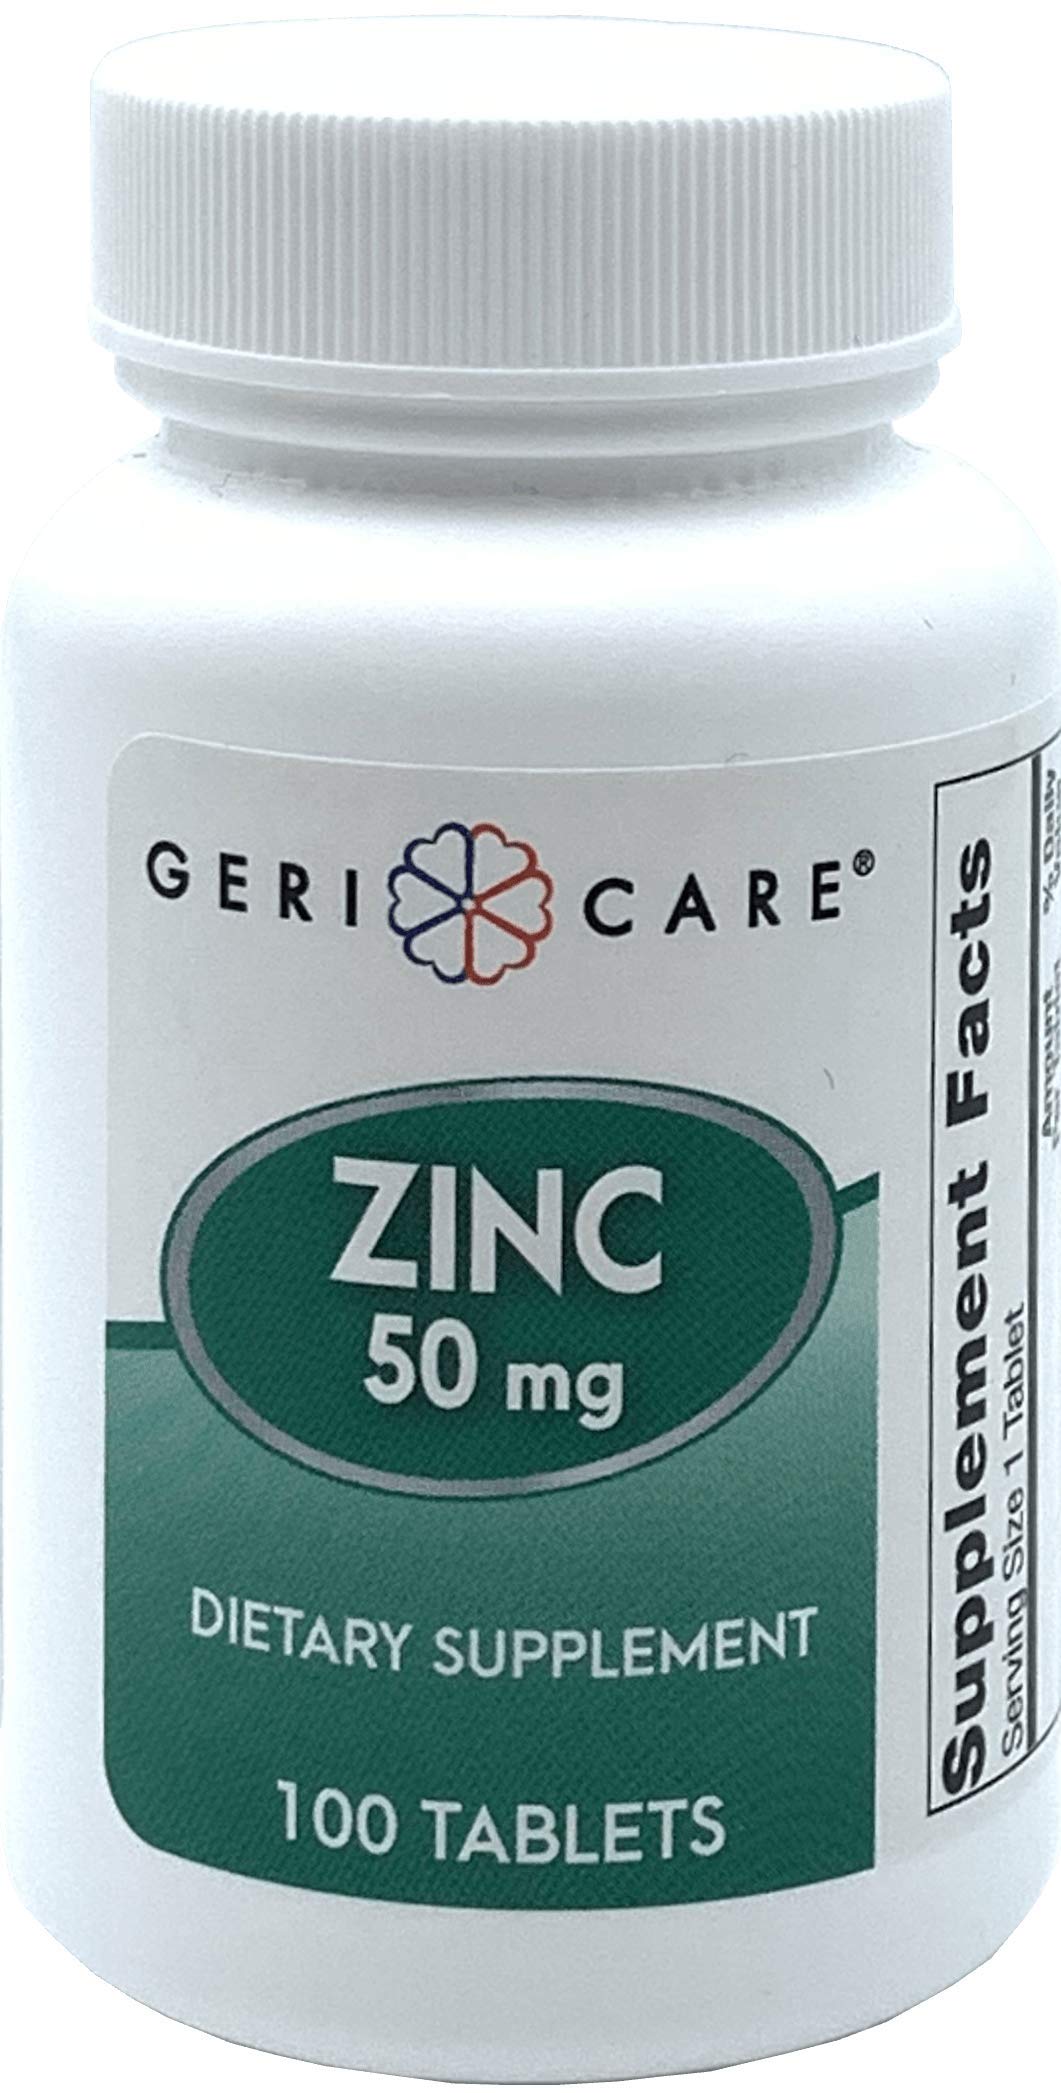 Gericare Zinc Sulfate 220mg Dietary Supplement, 100 Count